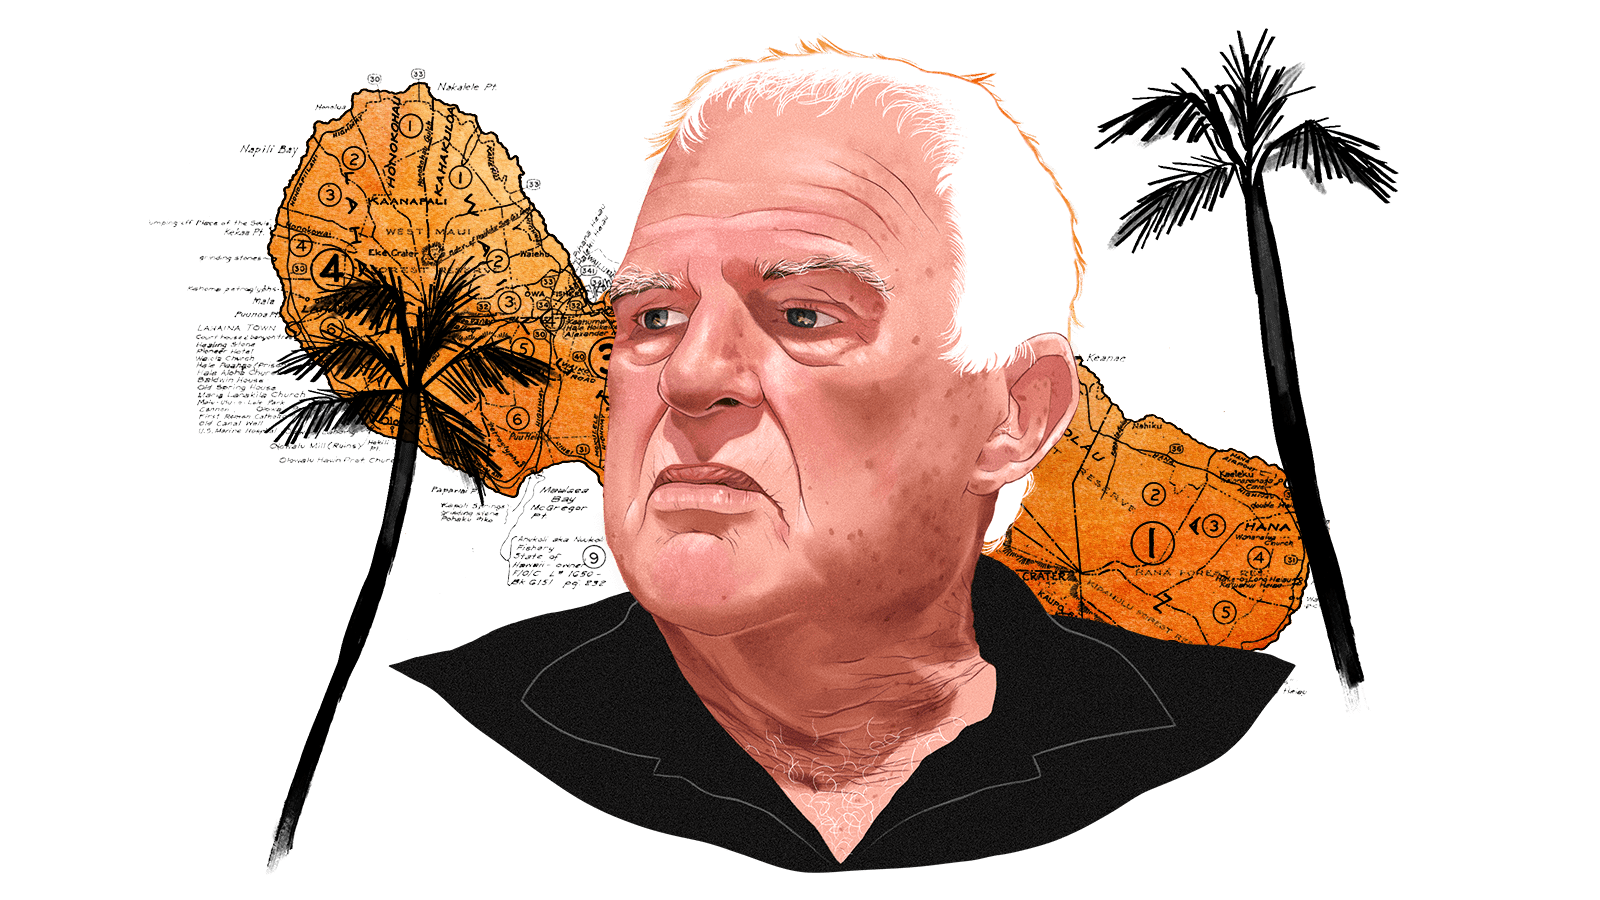 Illustrated portrait of a white man in his 70s (Peter Martin) with an orange map of Maui and black palm trees in the background